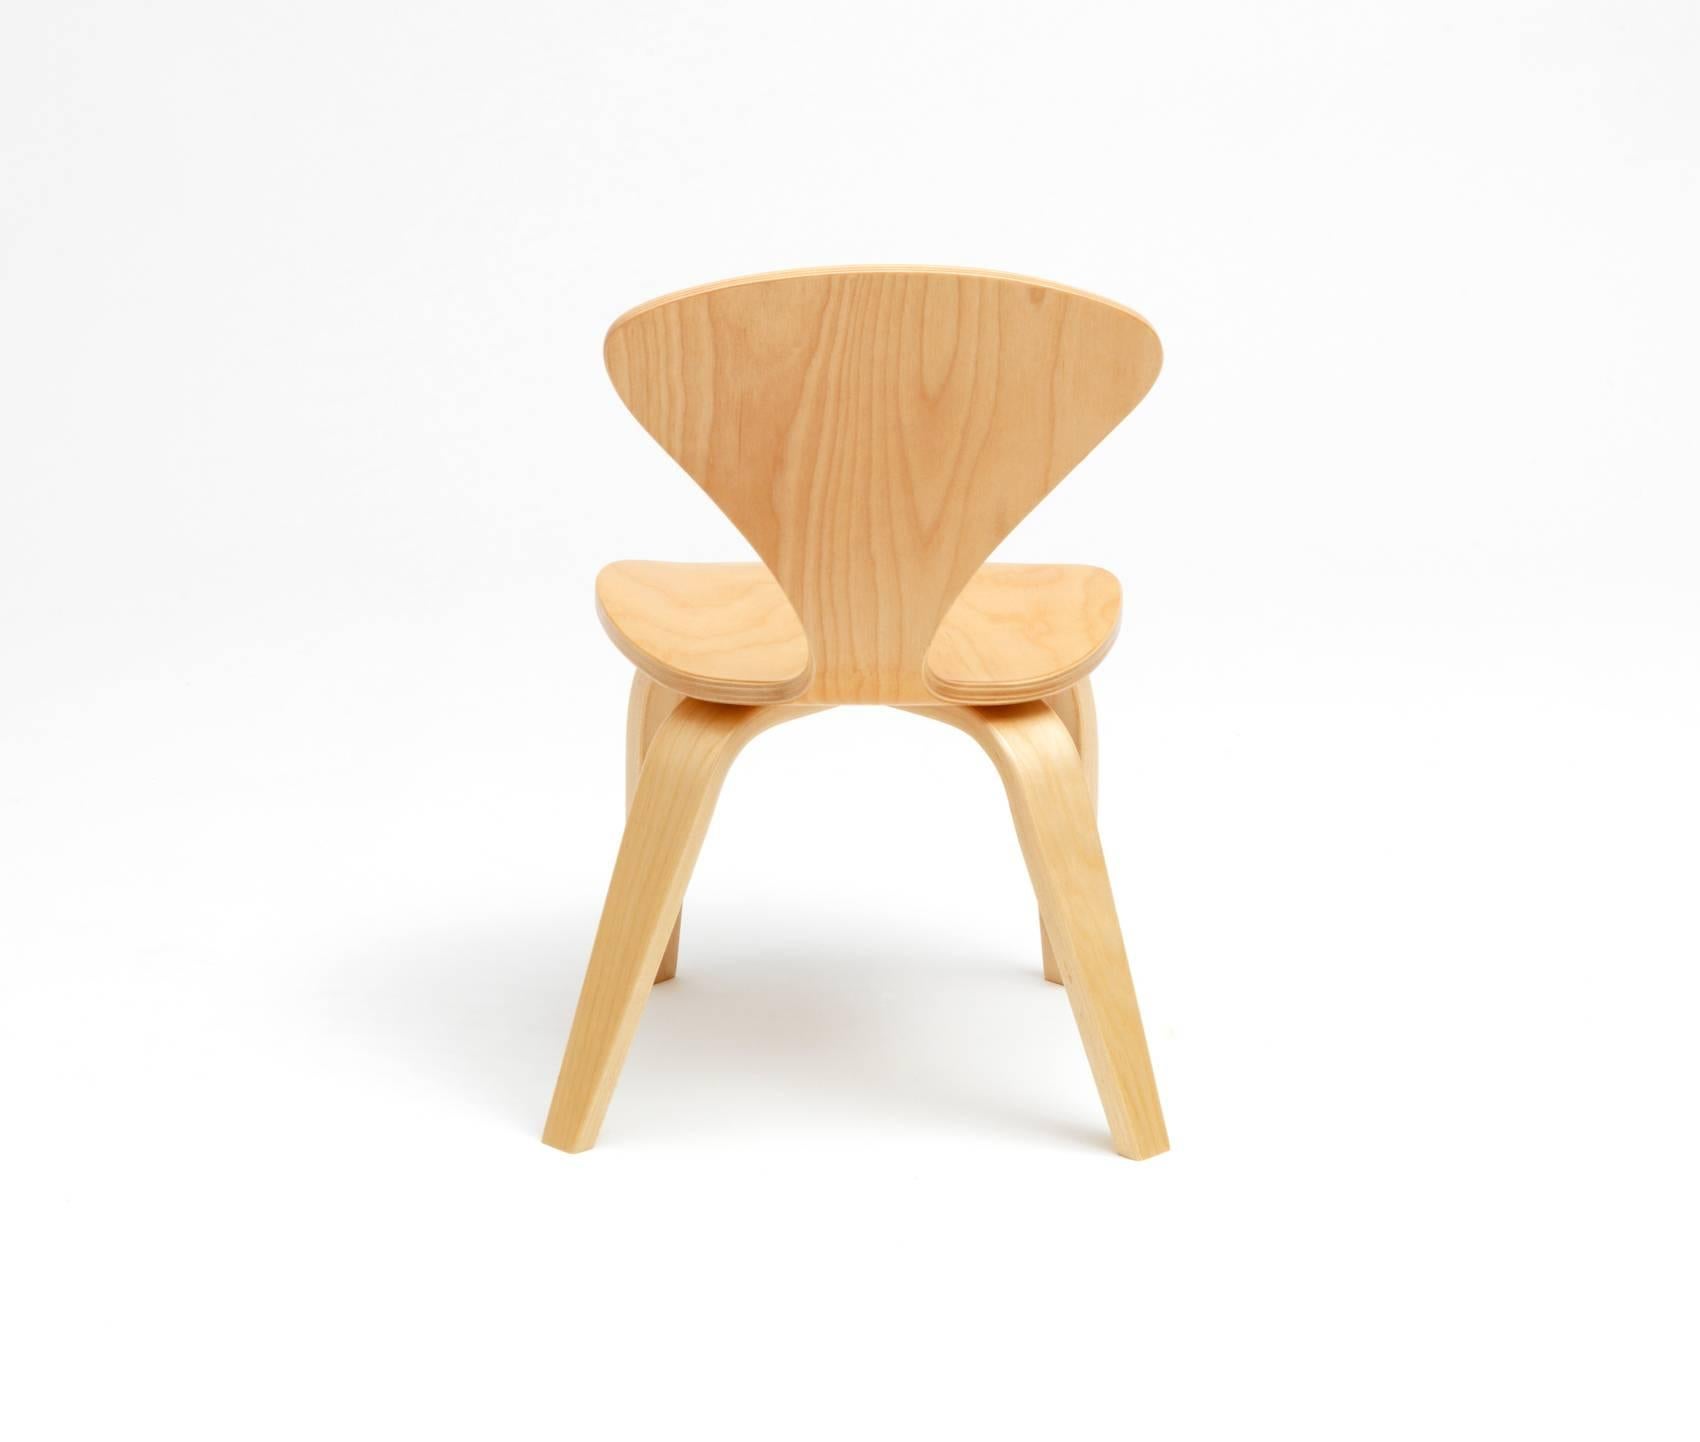 Molded Cherner Child Chair by Benjamin Cherner in Birch, Contemporary, USA, 2007 For Sale